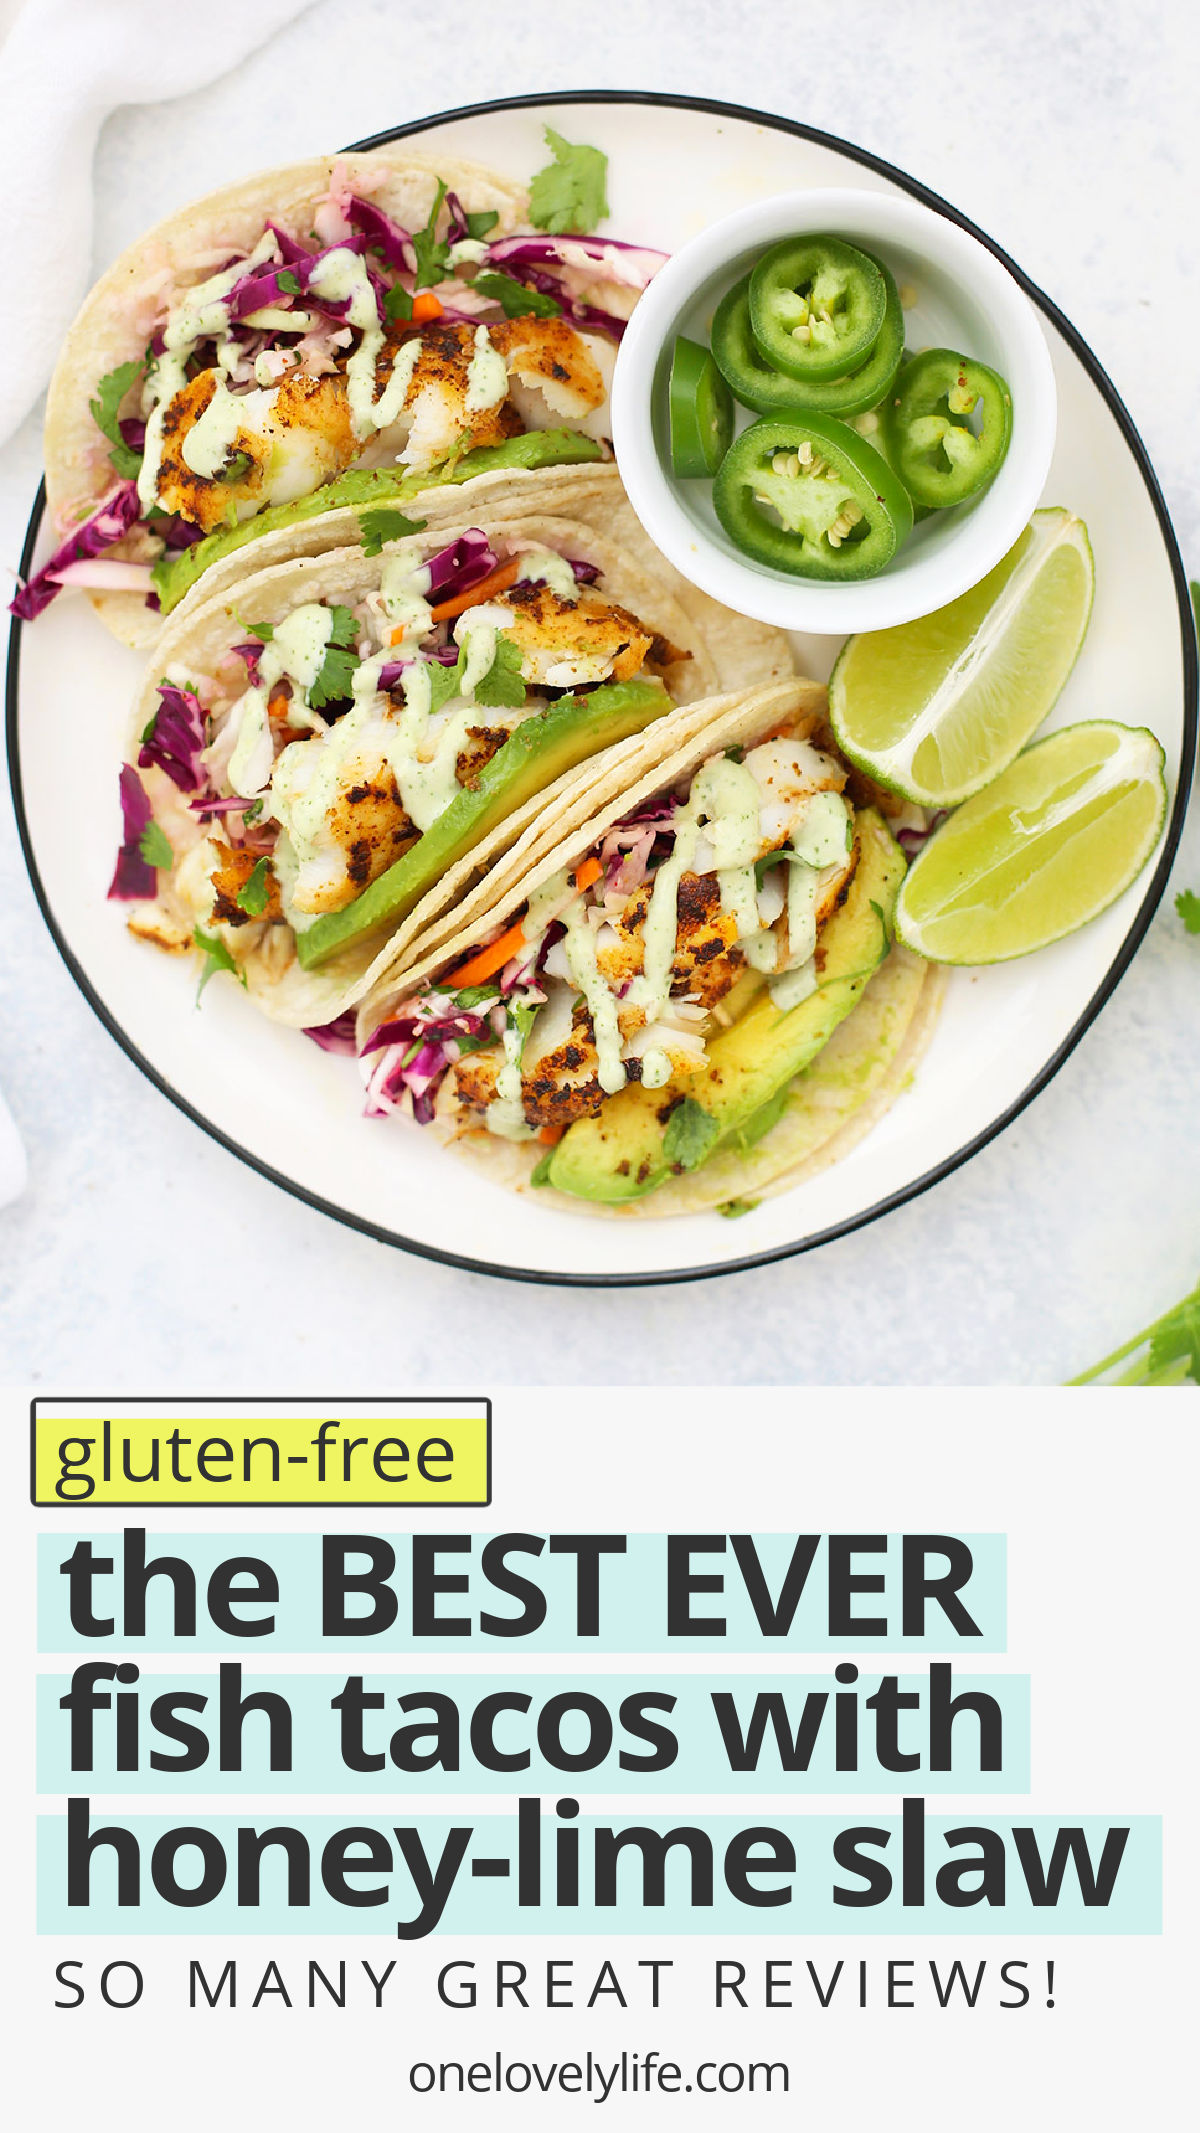 Gluten Free Fish Tacos with Honey Lime Cilantro Slaw - The BEST fish taco recipe! Perfectly cooked fish with an easy cabbage slaw that makes these taste amazing. // #onelovelylife #glutenfree #fishtacos #tacos // Gluten Free Dinner Ideas // Fish Tacos // Healthy Fish Tacos // Taco Recipe #fishtacos #tacos #glutenfree